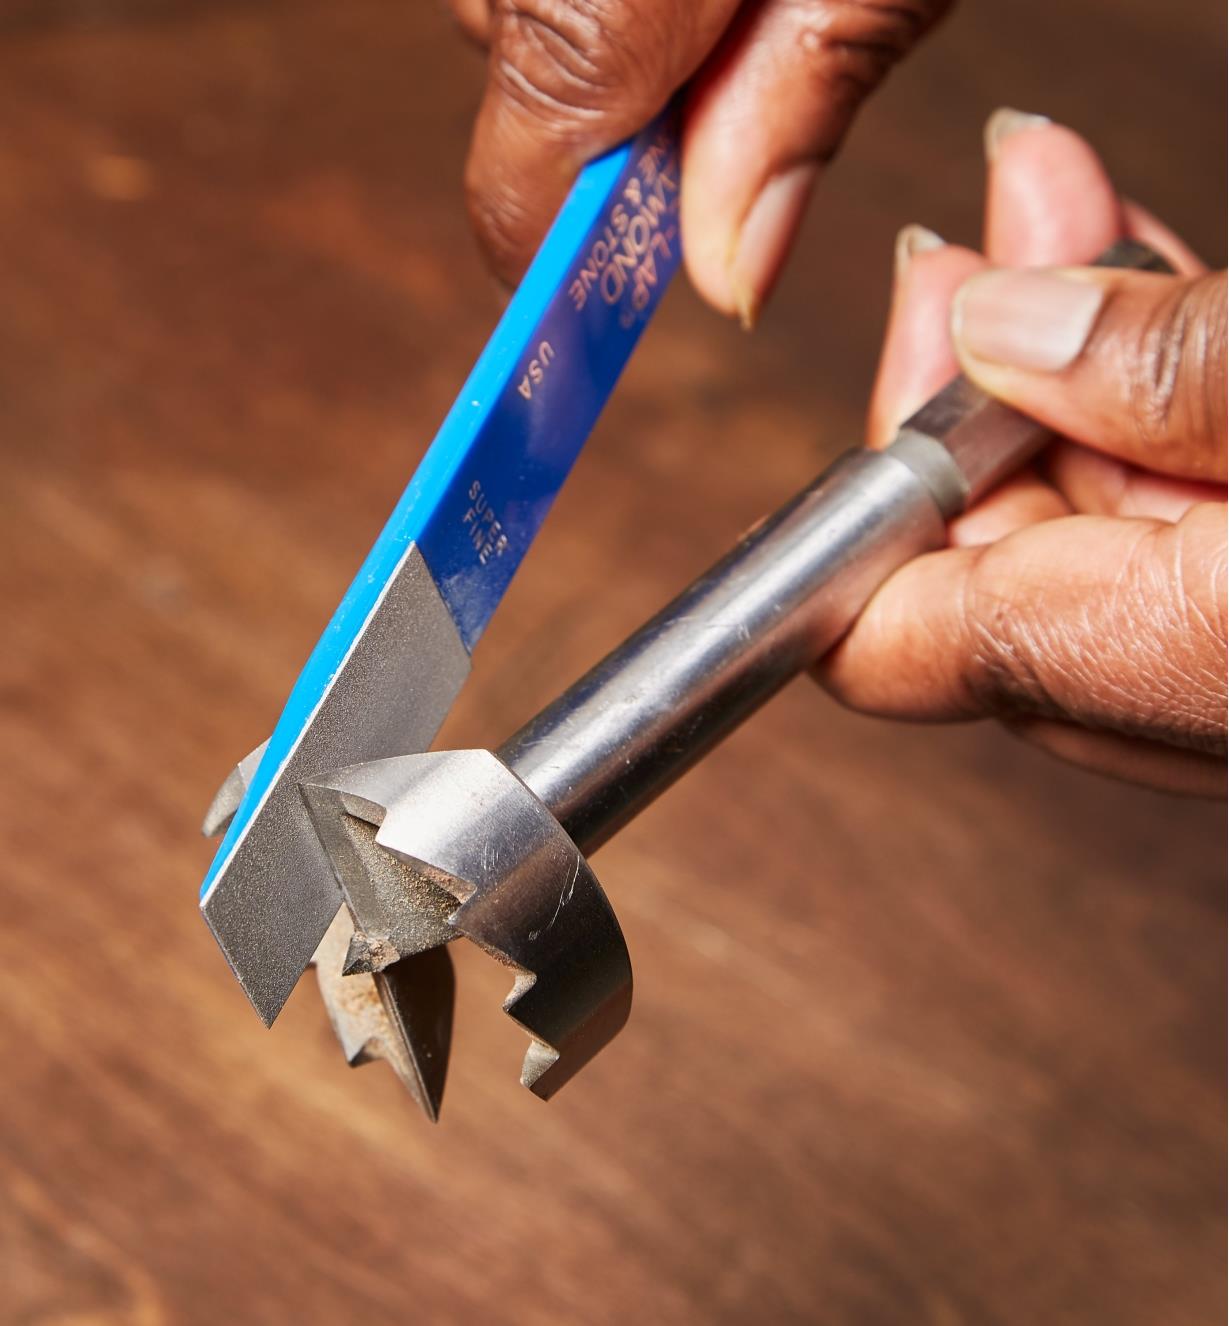 Using a paddle hone on a saw-tooth bit